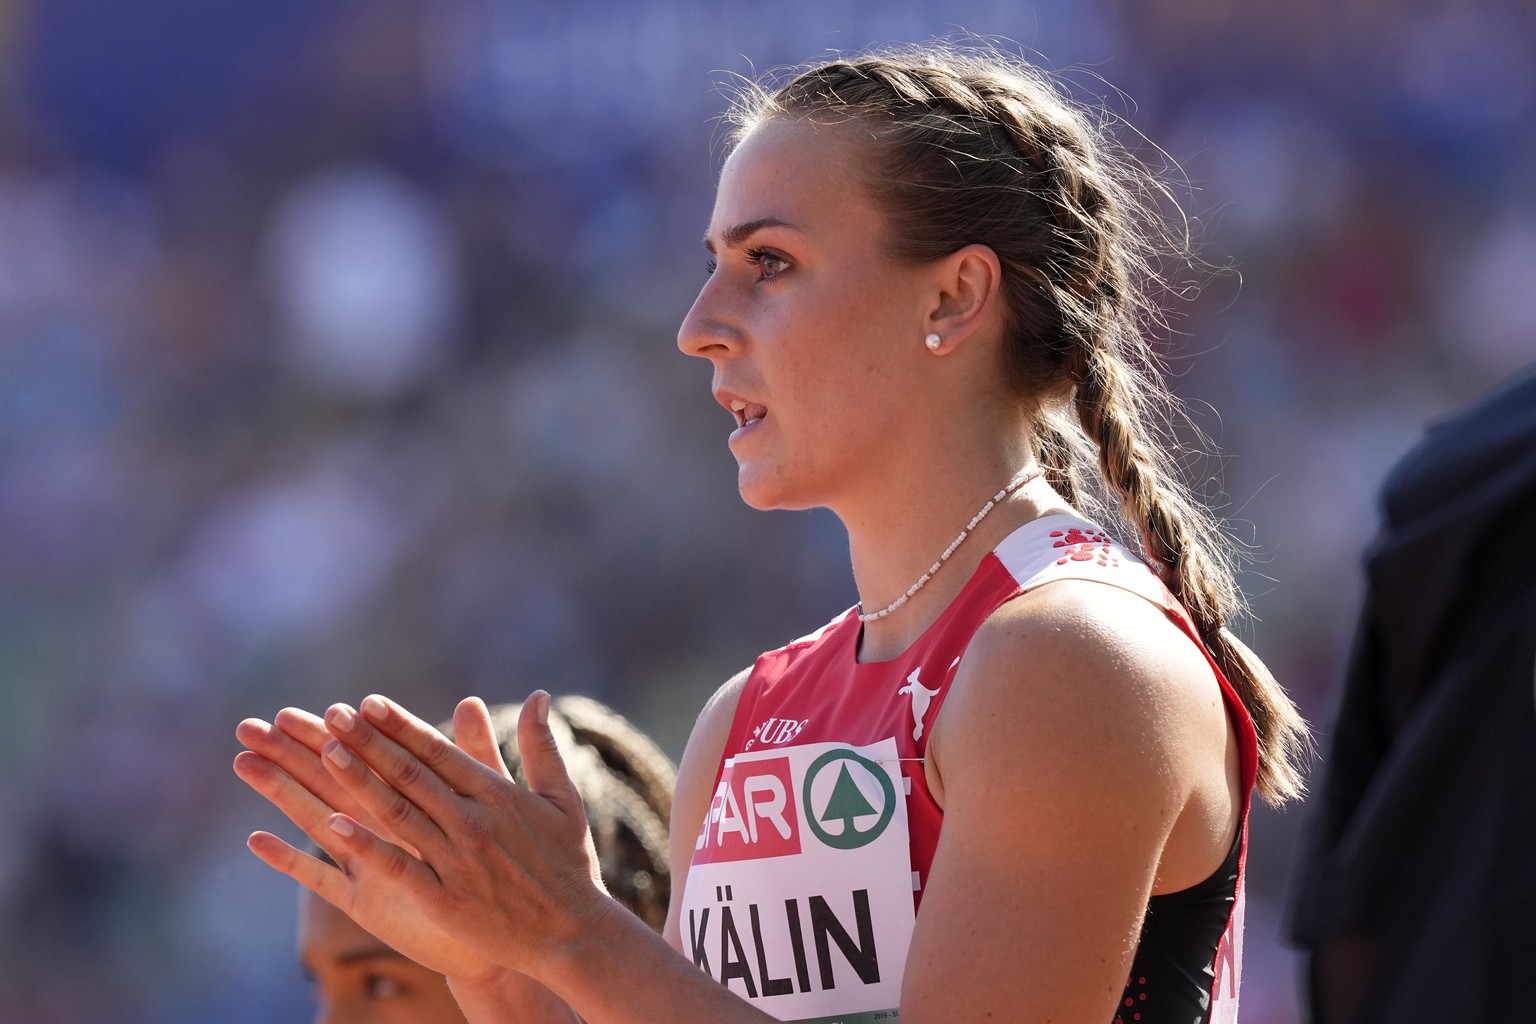 Annik Kalin, of Switzerland, reacts after winning a Women's heptathlon 100 meters hurdles heat during the athletics competition in the Olympic Stadium at the European Championships in Munich, Germany, ...